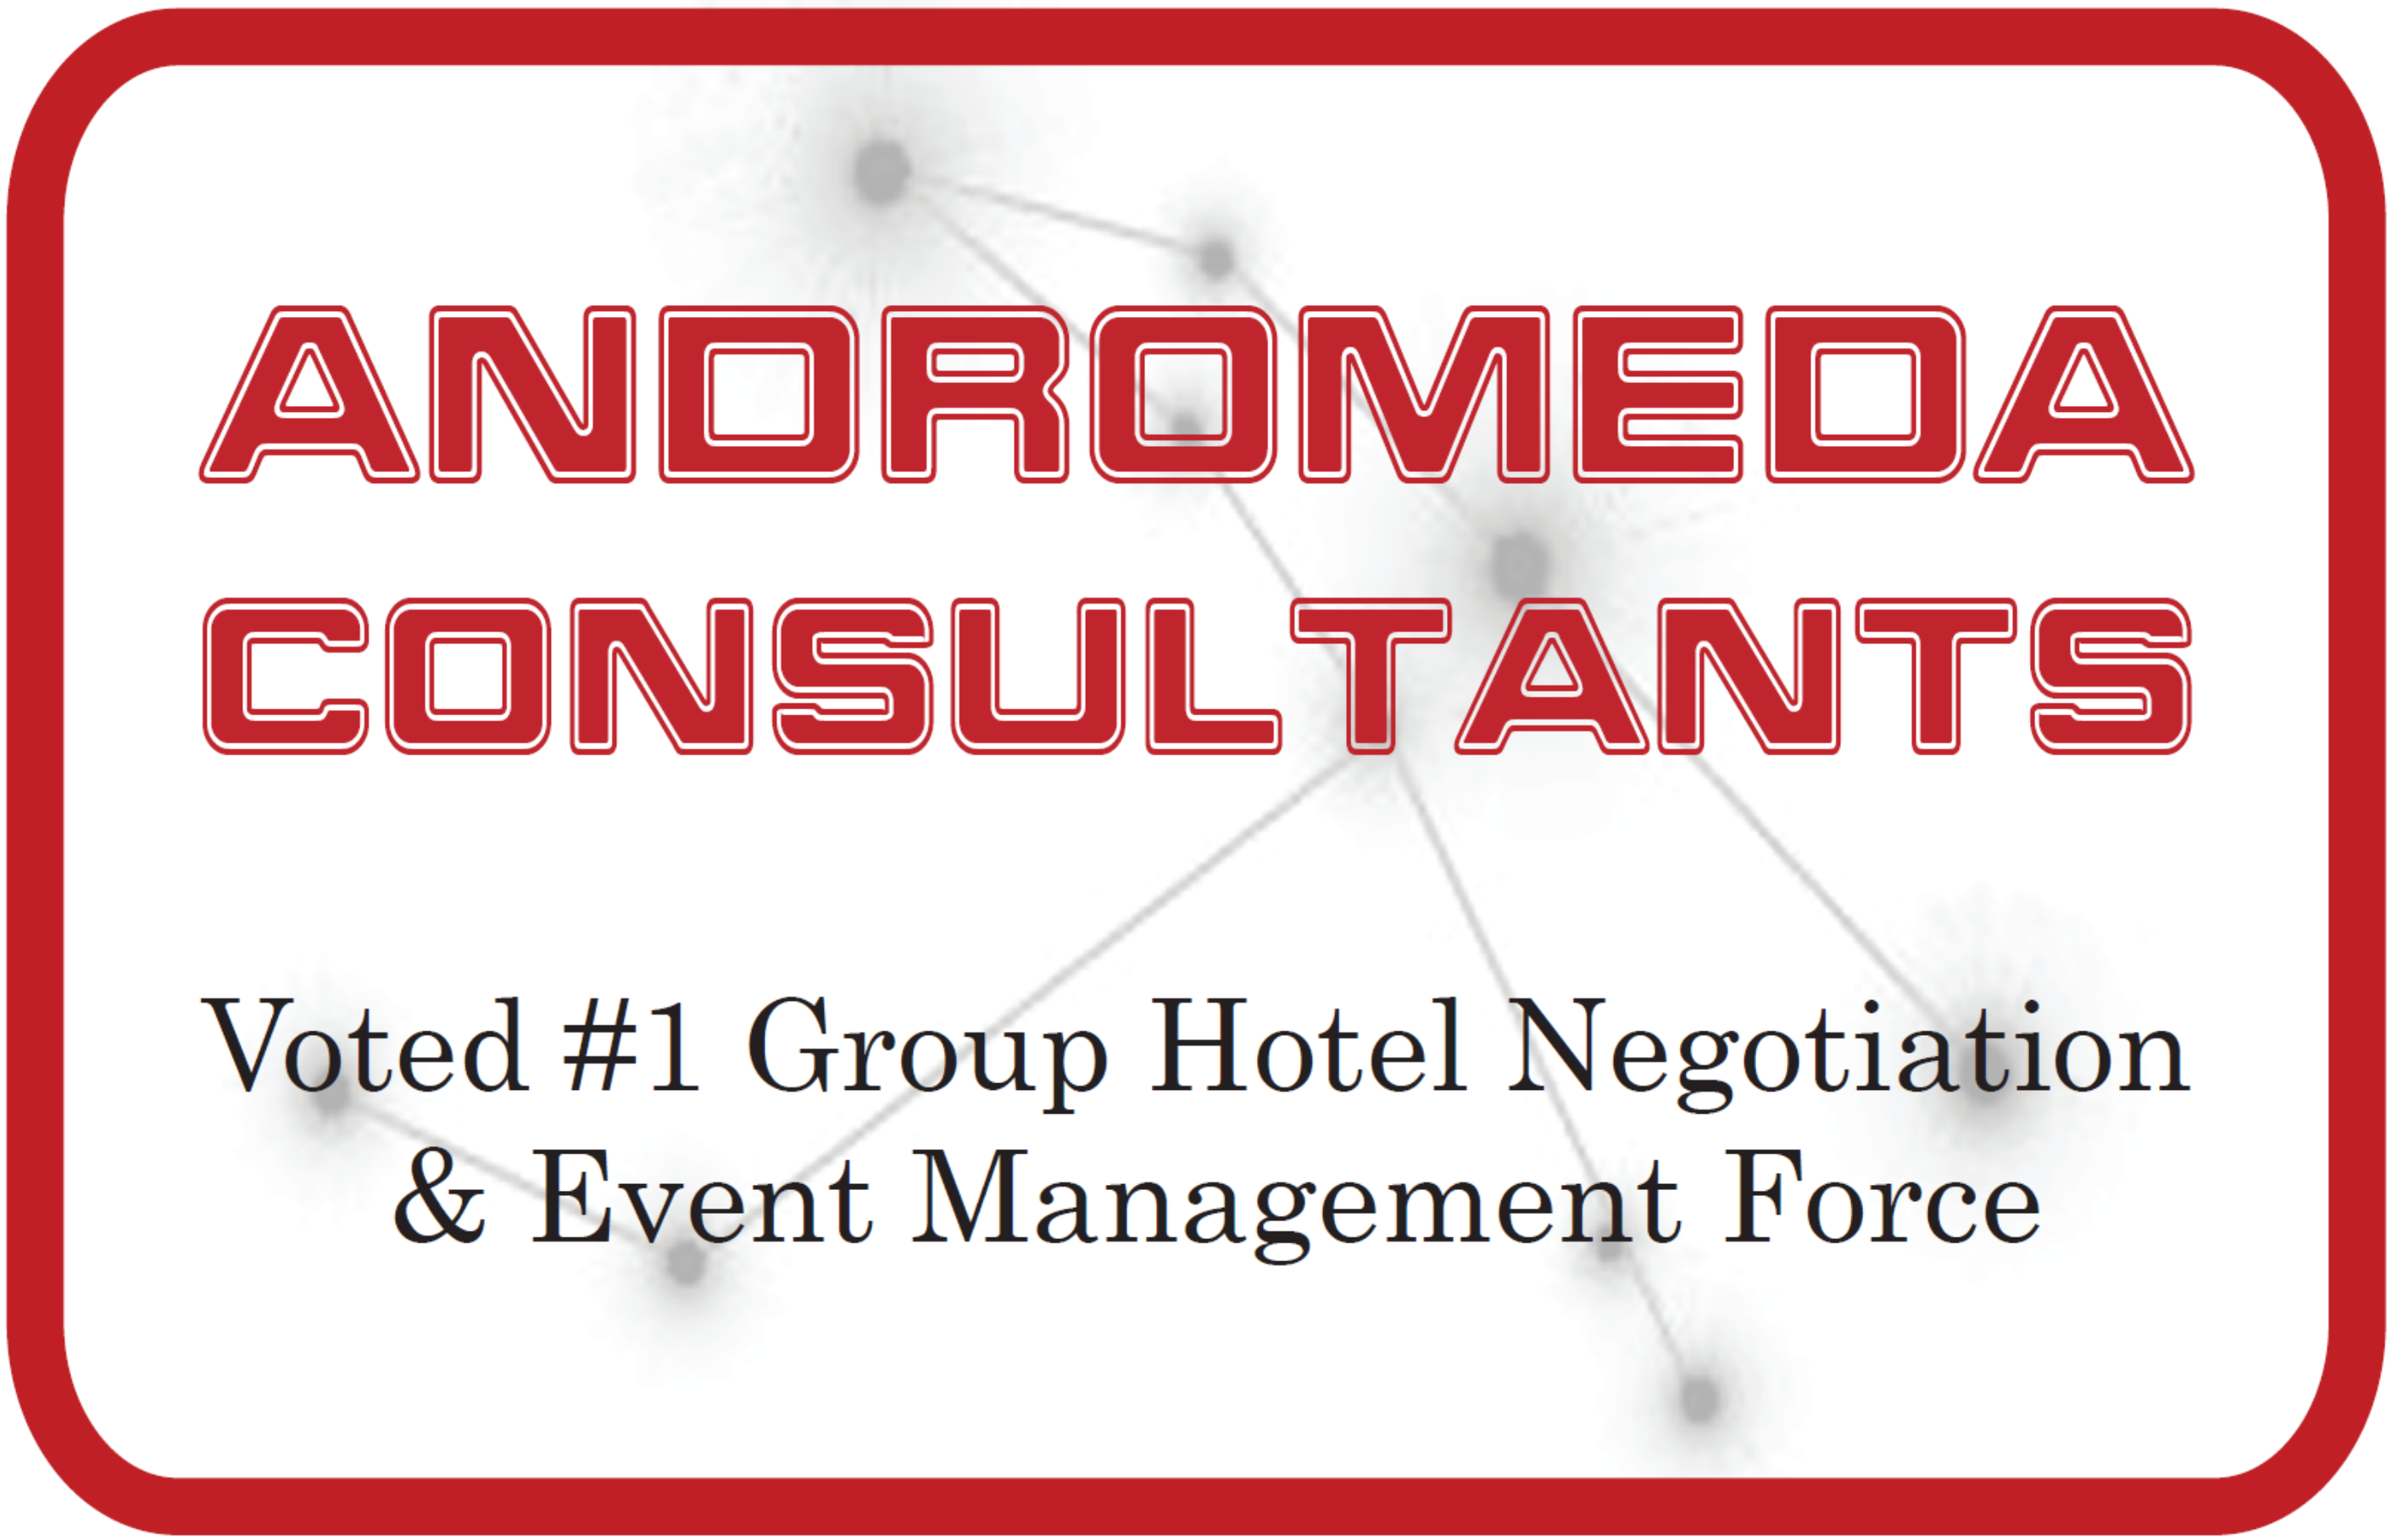 Hotel and Travel considerations provided in part by Andromeda Consultants